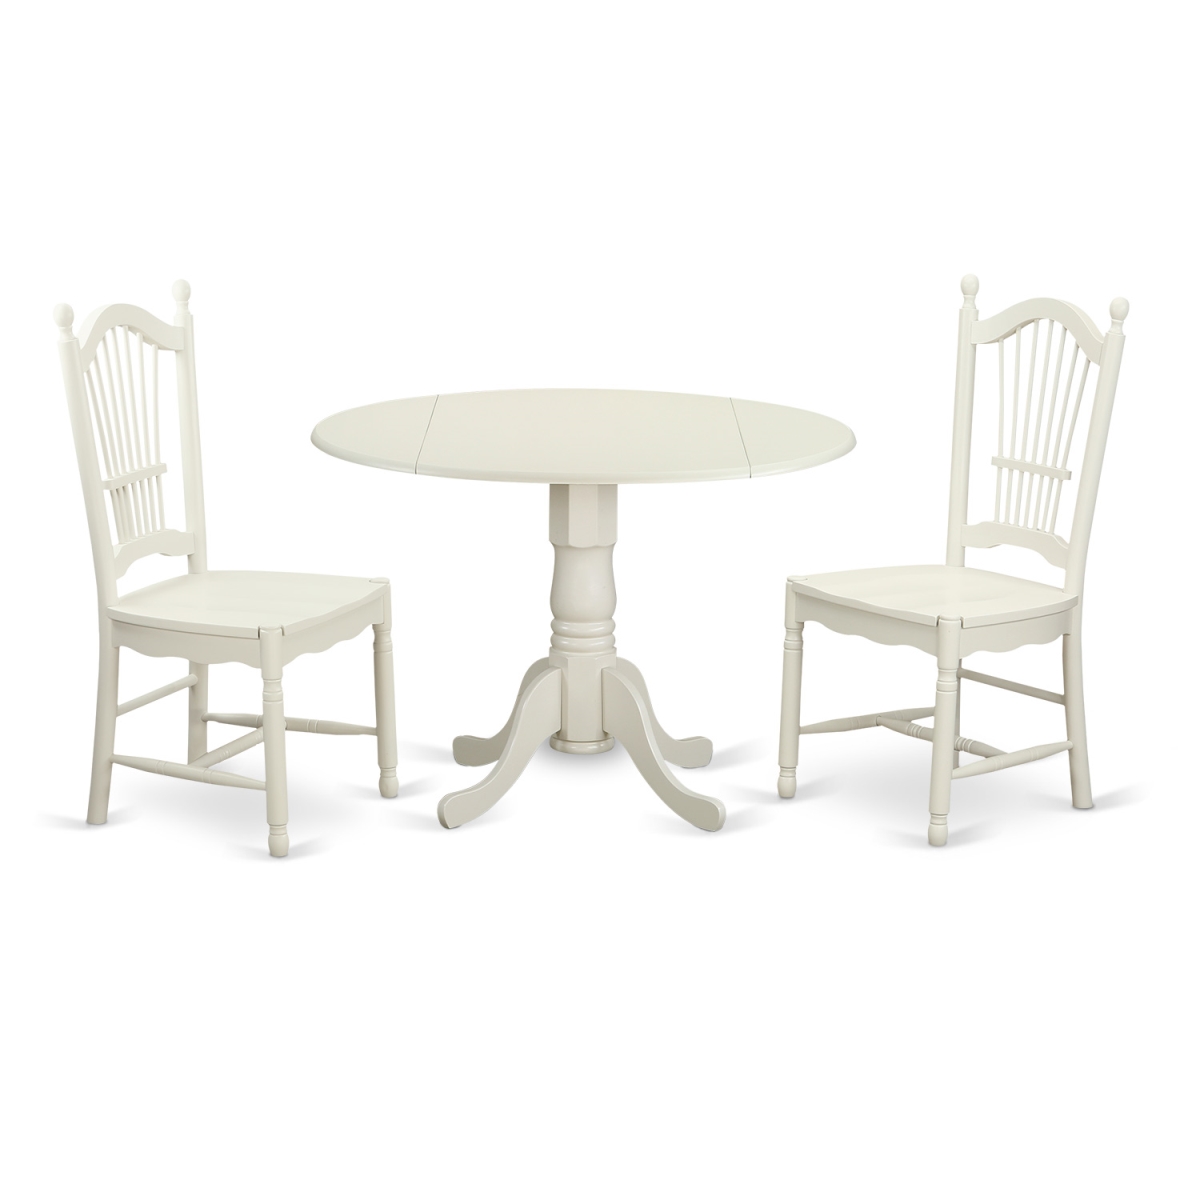 Kitchen Dinette Set With 2 Table & 2 Chairs, Linen White - 3 Piece